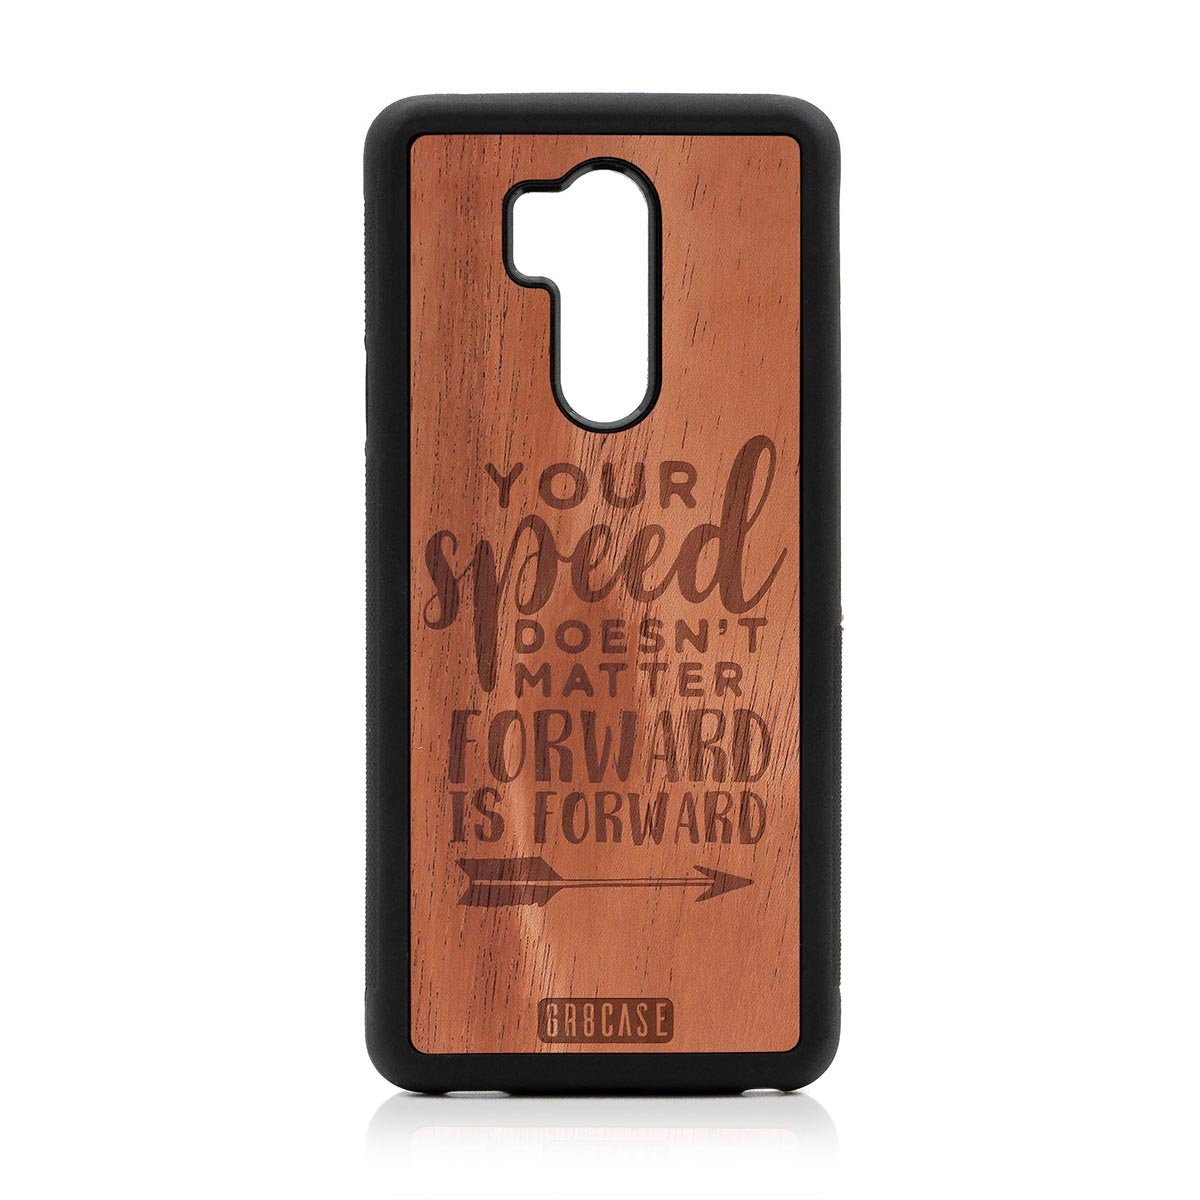 Your Speed Doesn't Matter Forward Is Forward Design Wood Case LG G7 ThinQ